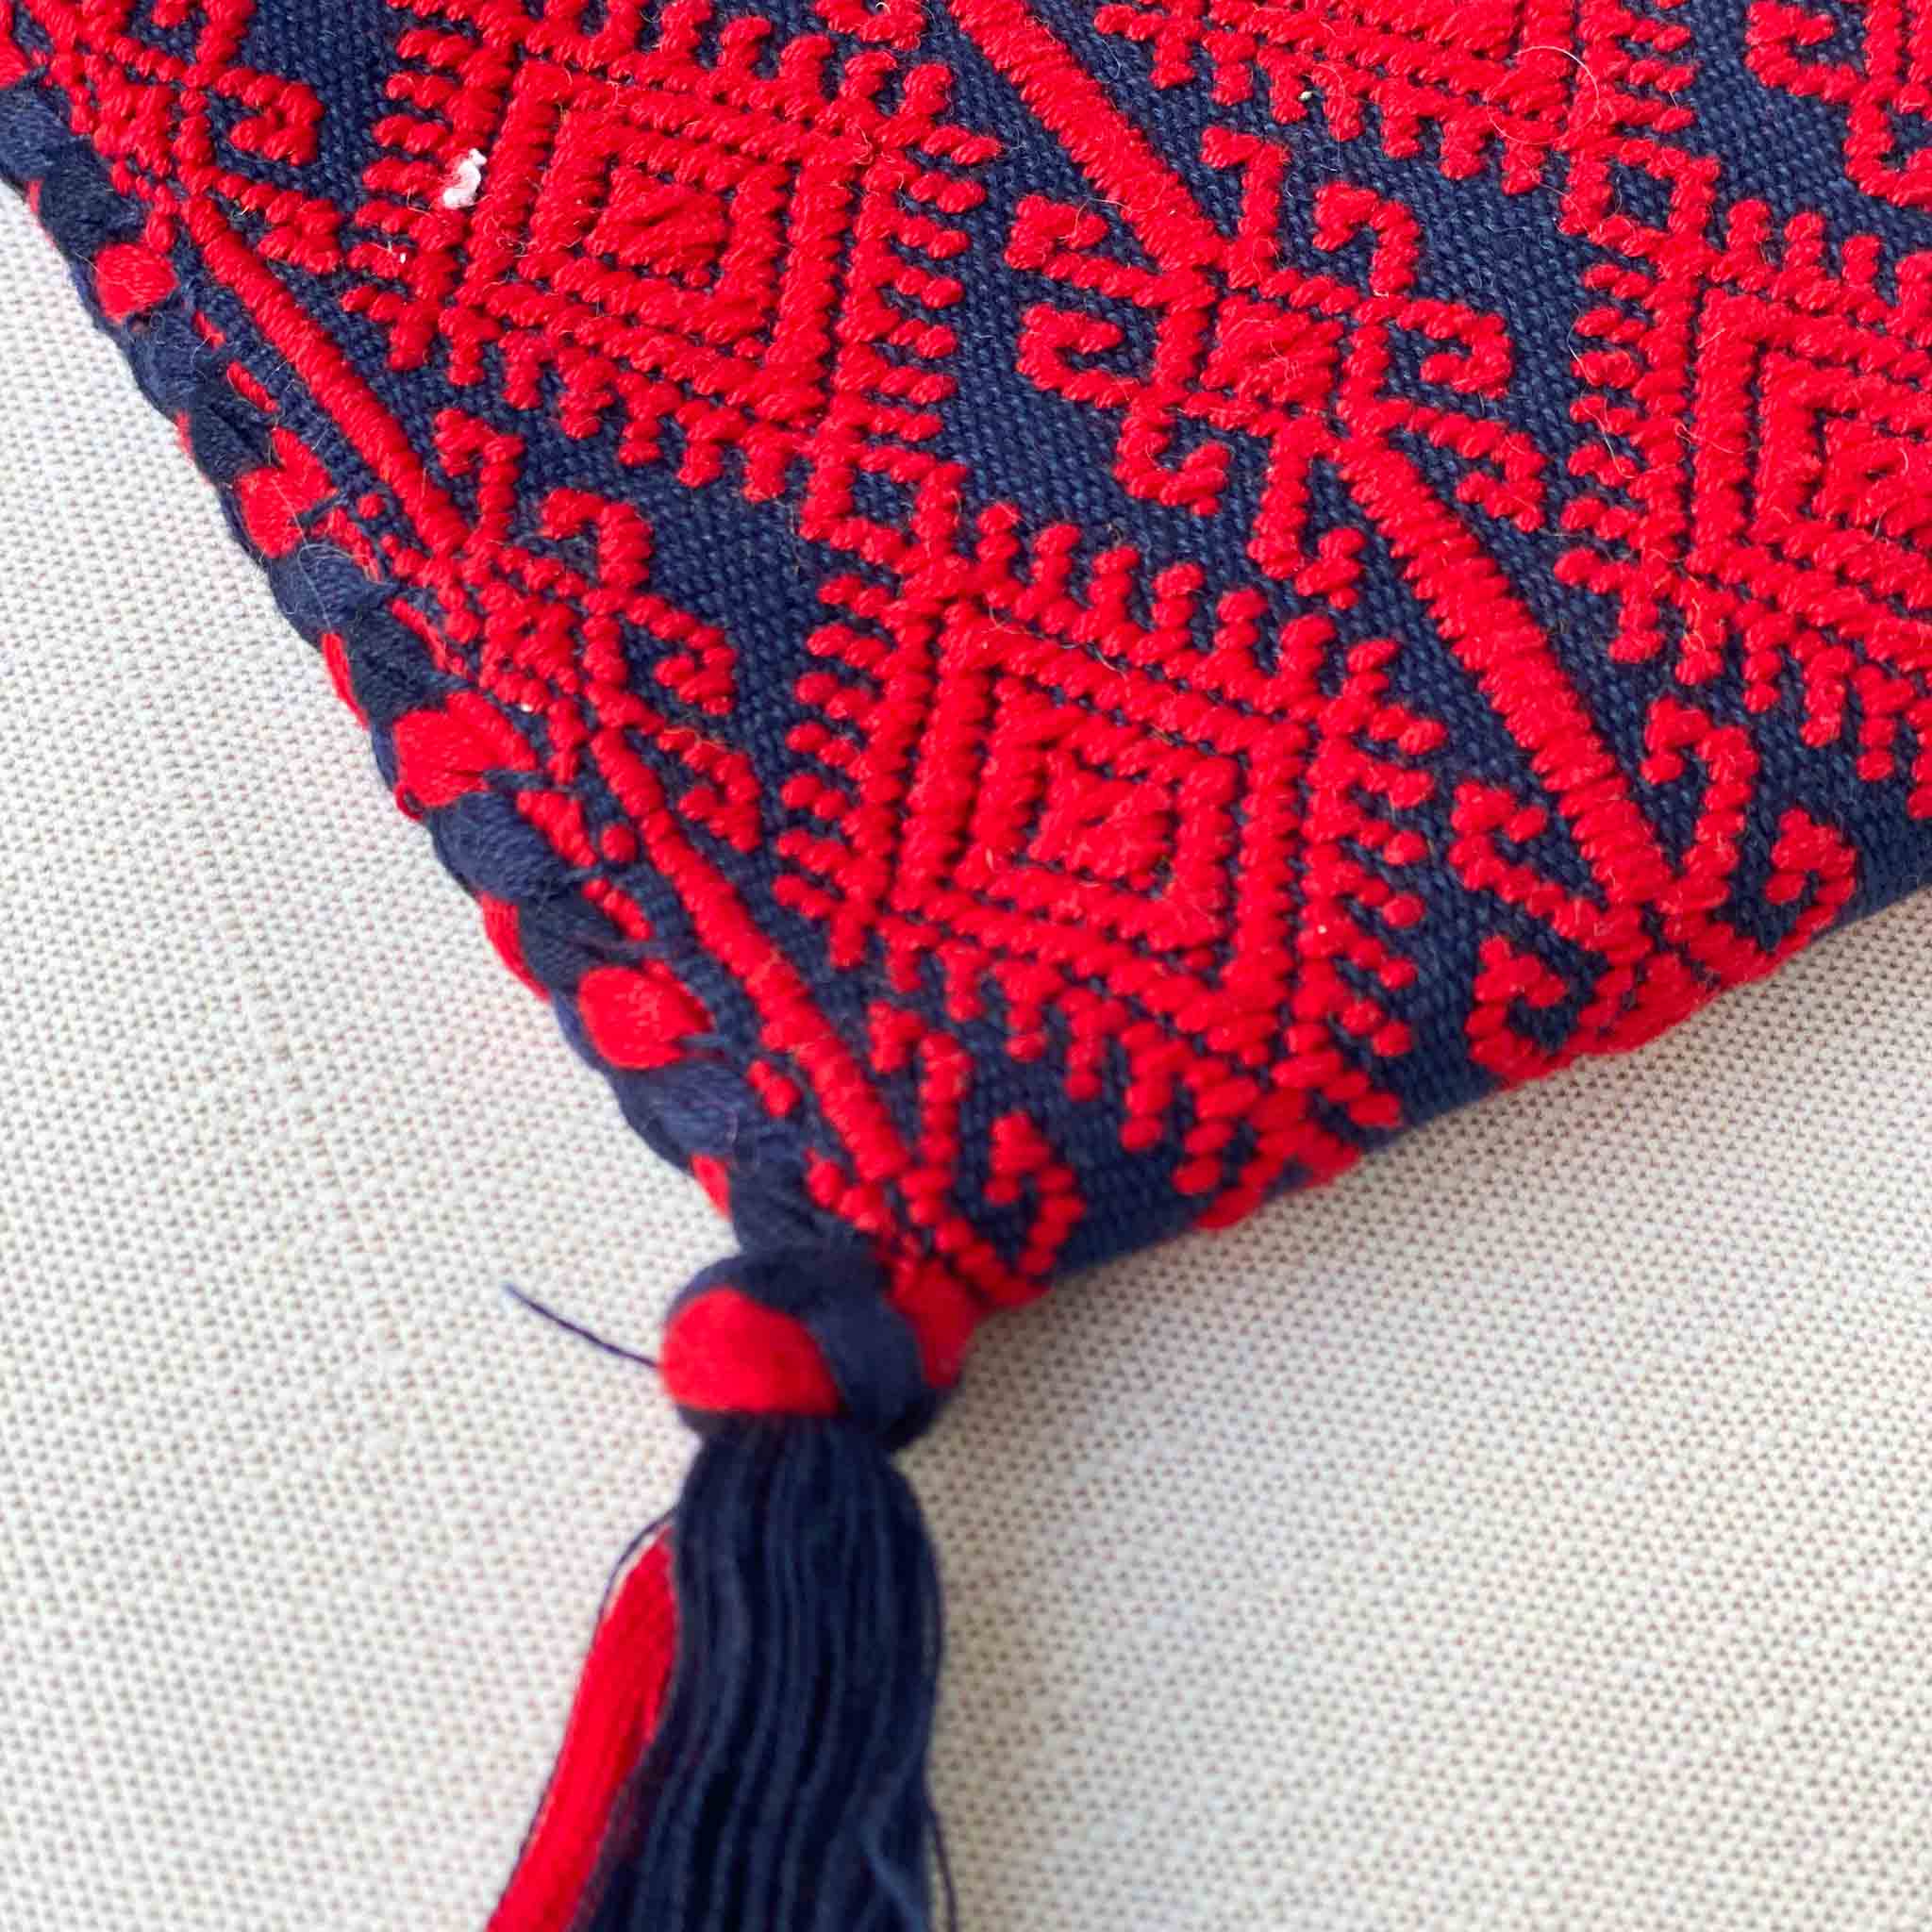    Handloomed-Convertible-Clutch-in-Red-and-Navy